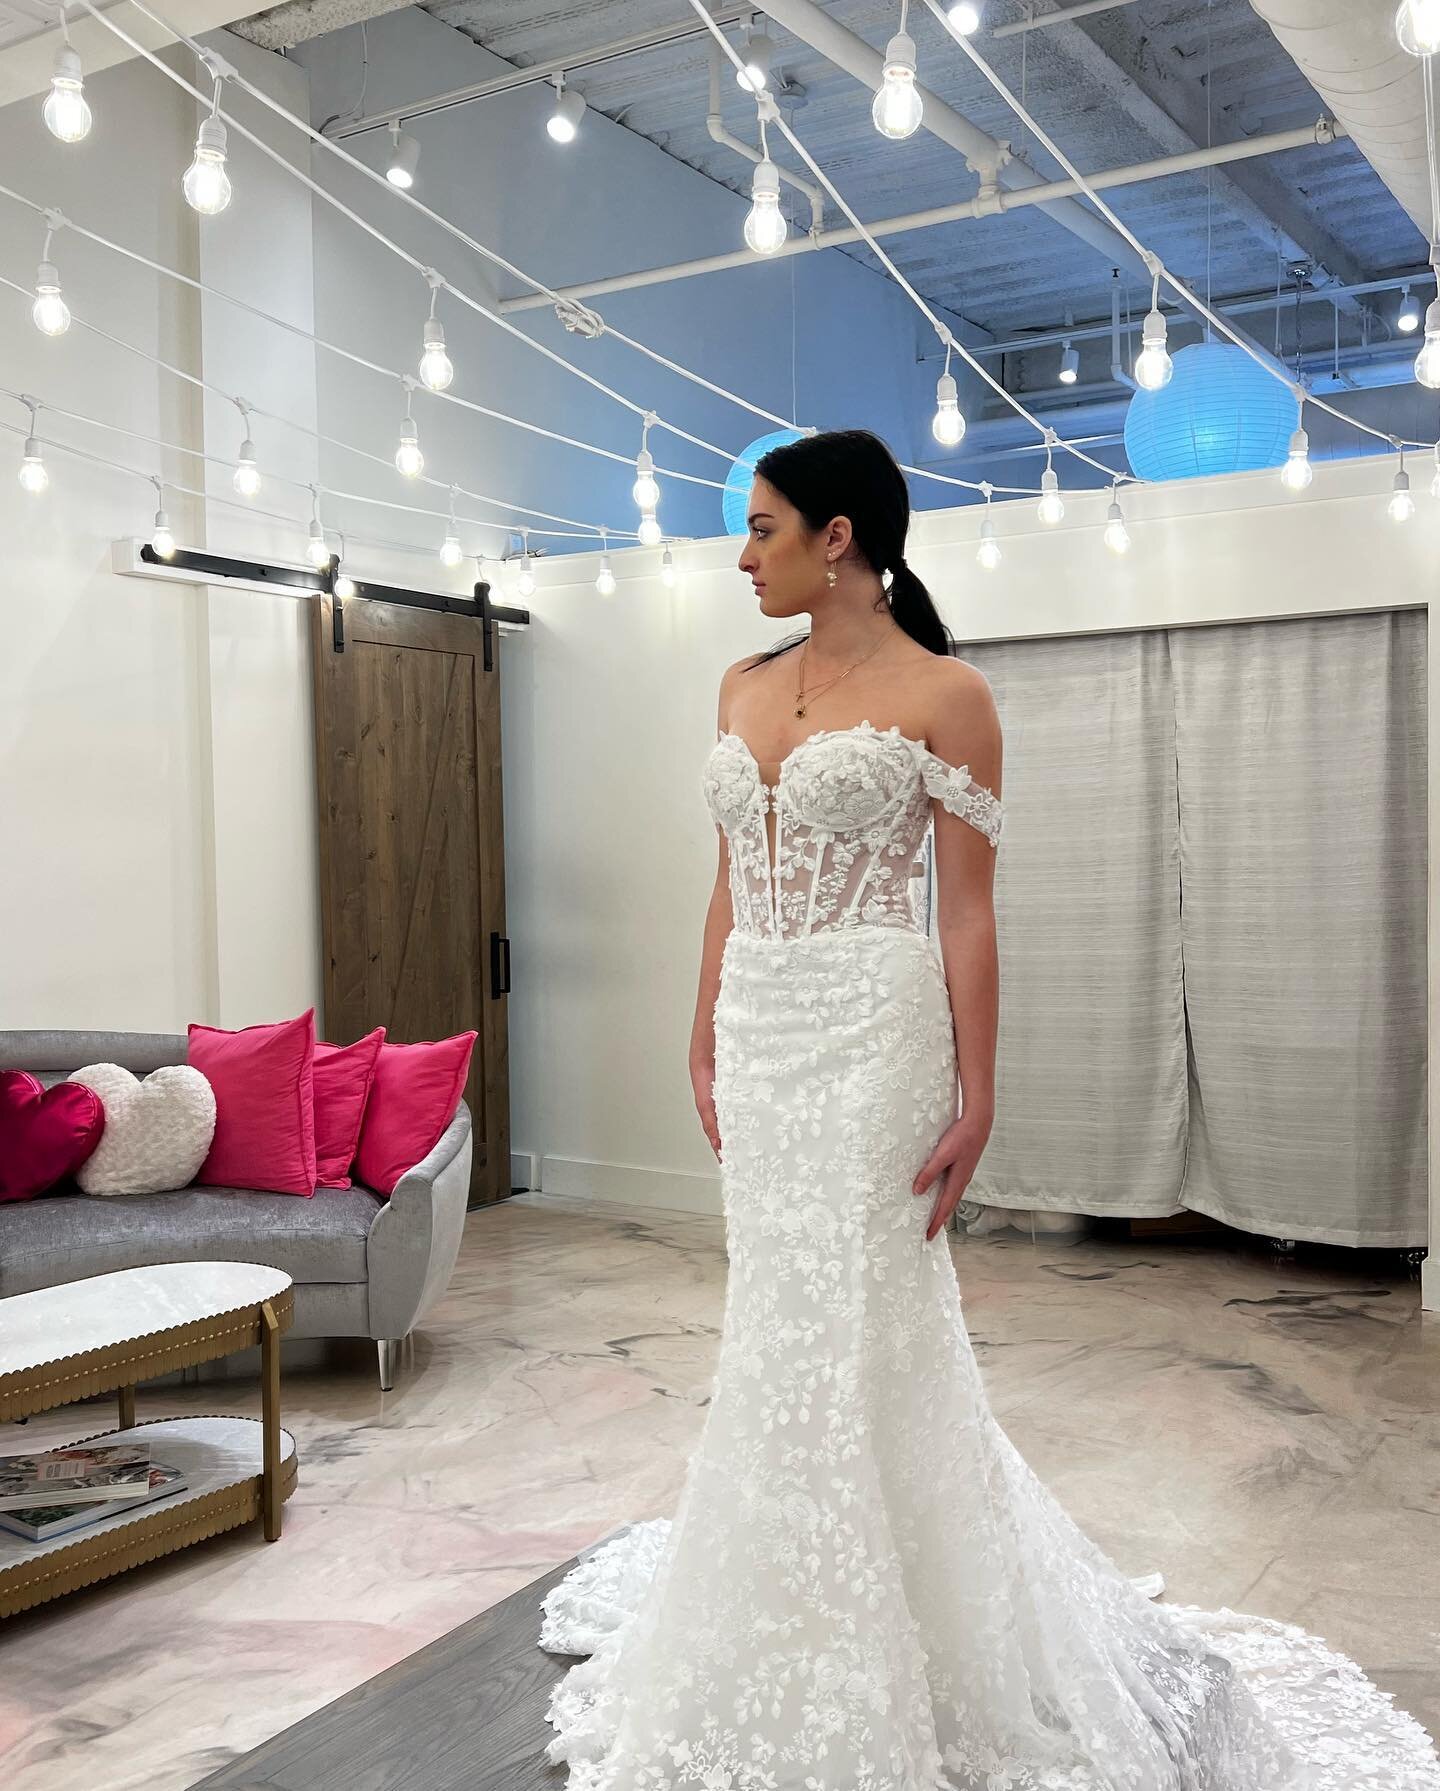 We are loving these two new arrivals from our Love Lane Collection!! The first gown being a fit n flare, and the second one being an a-line gown! Both gowns include intricate beadwork and lace detailing that give you everything you need for your big 